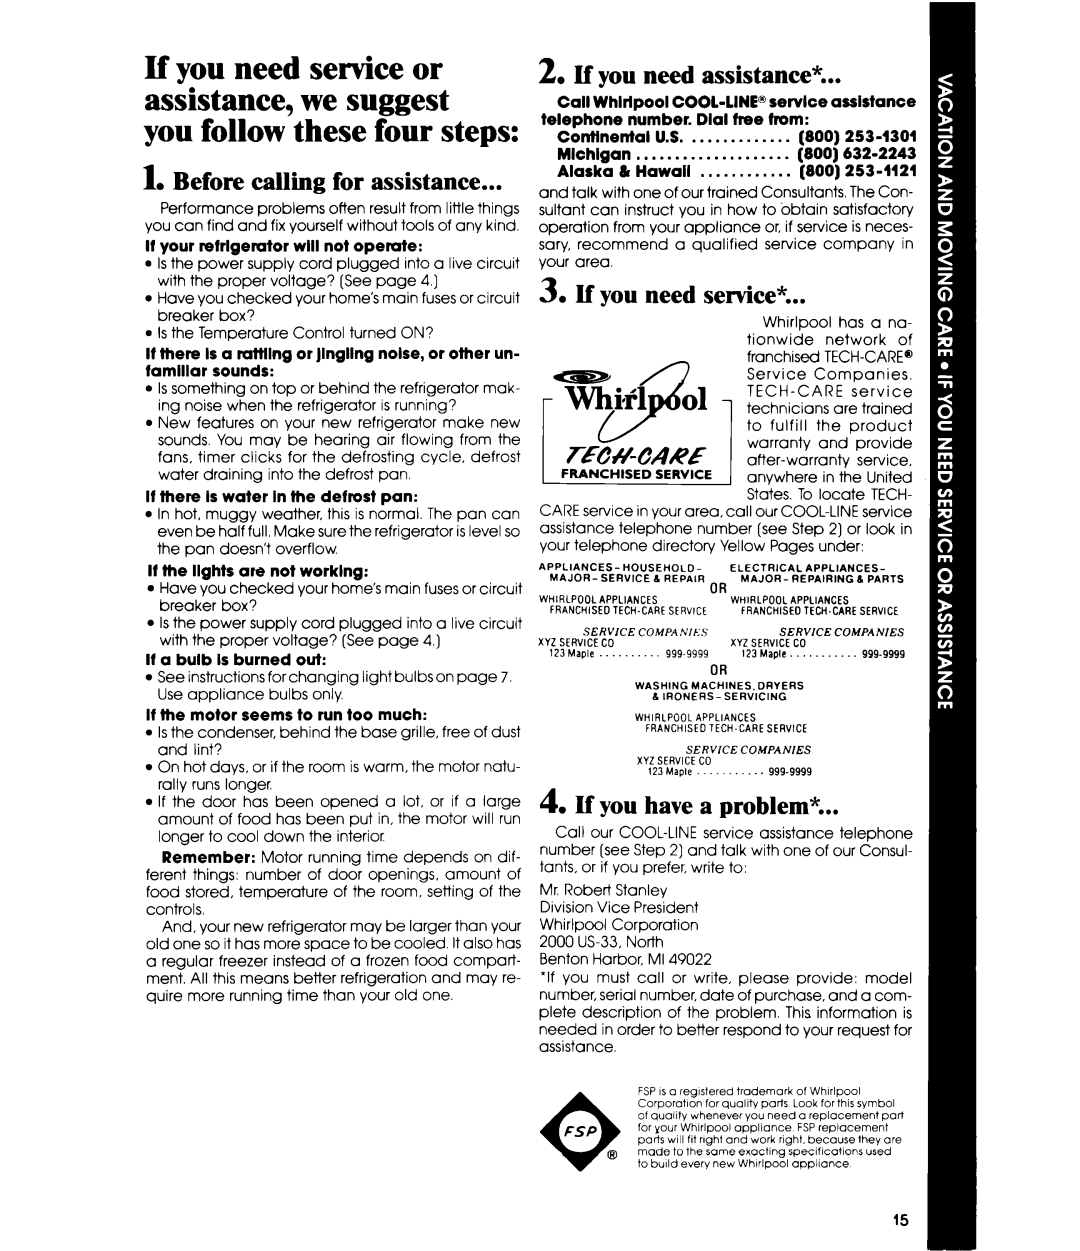 Whirlpool EDl9VK manual Before calling for assistance, If you need assistance, If you need setice, If you have a problem 